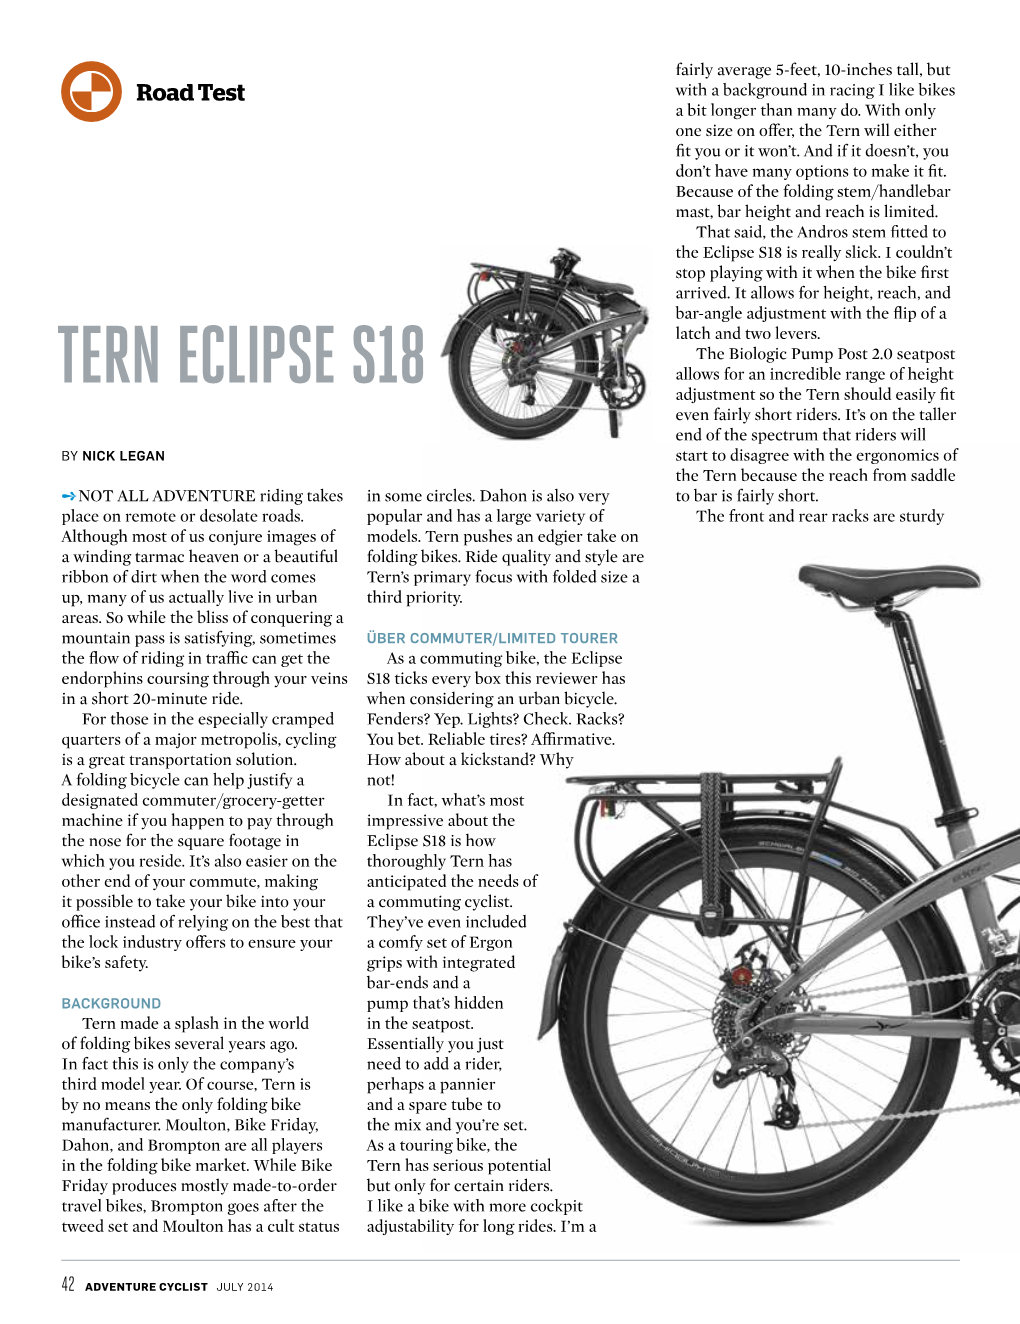 TERN ECLIPSE S18 Allows for an Incredible Range of Height Adjustment So the Tern Should Easily Fit Even Fairly Short Riders